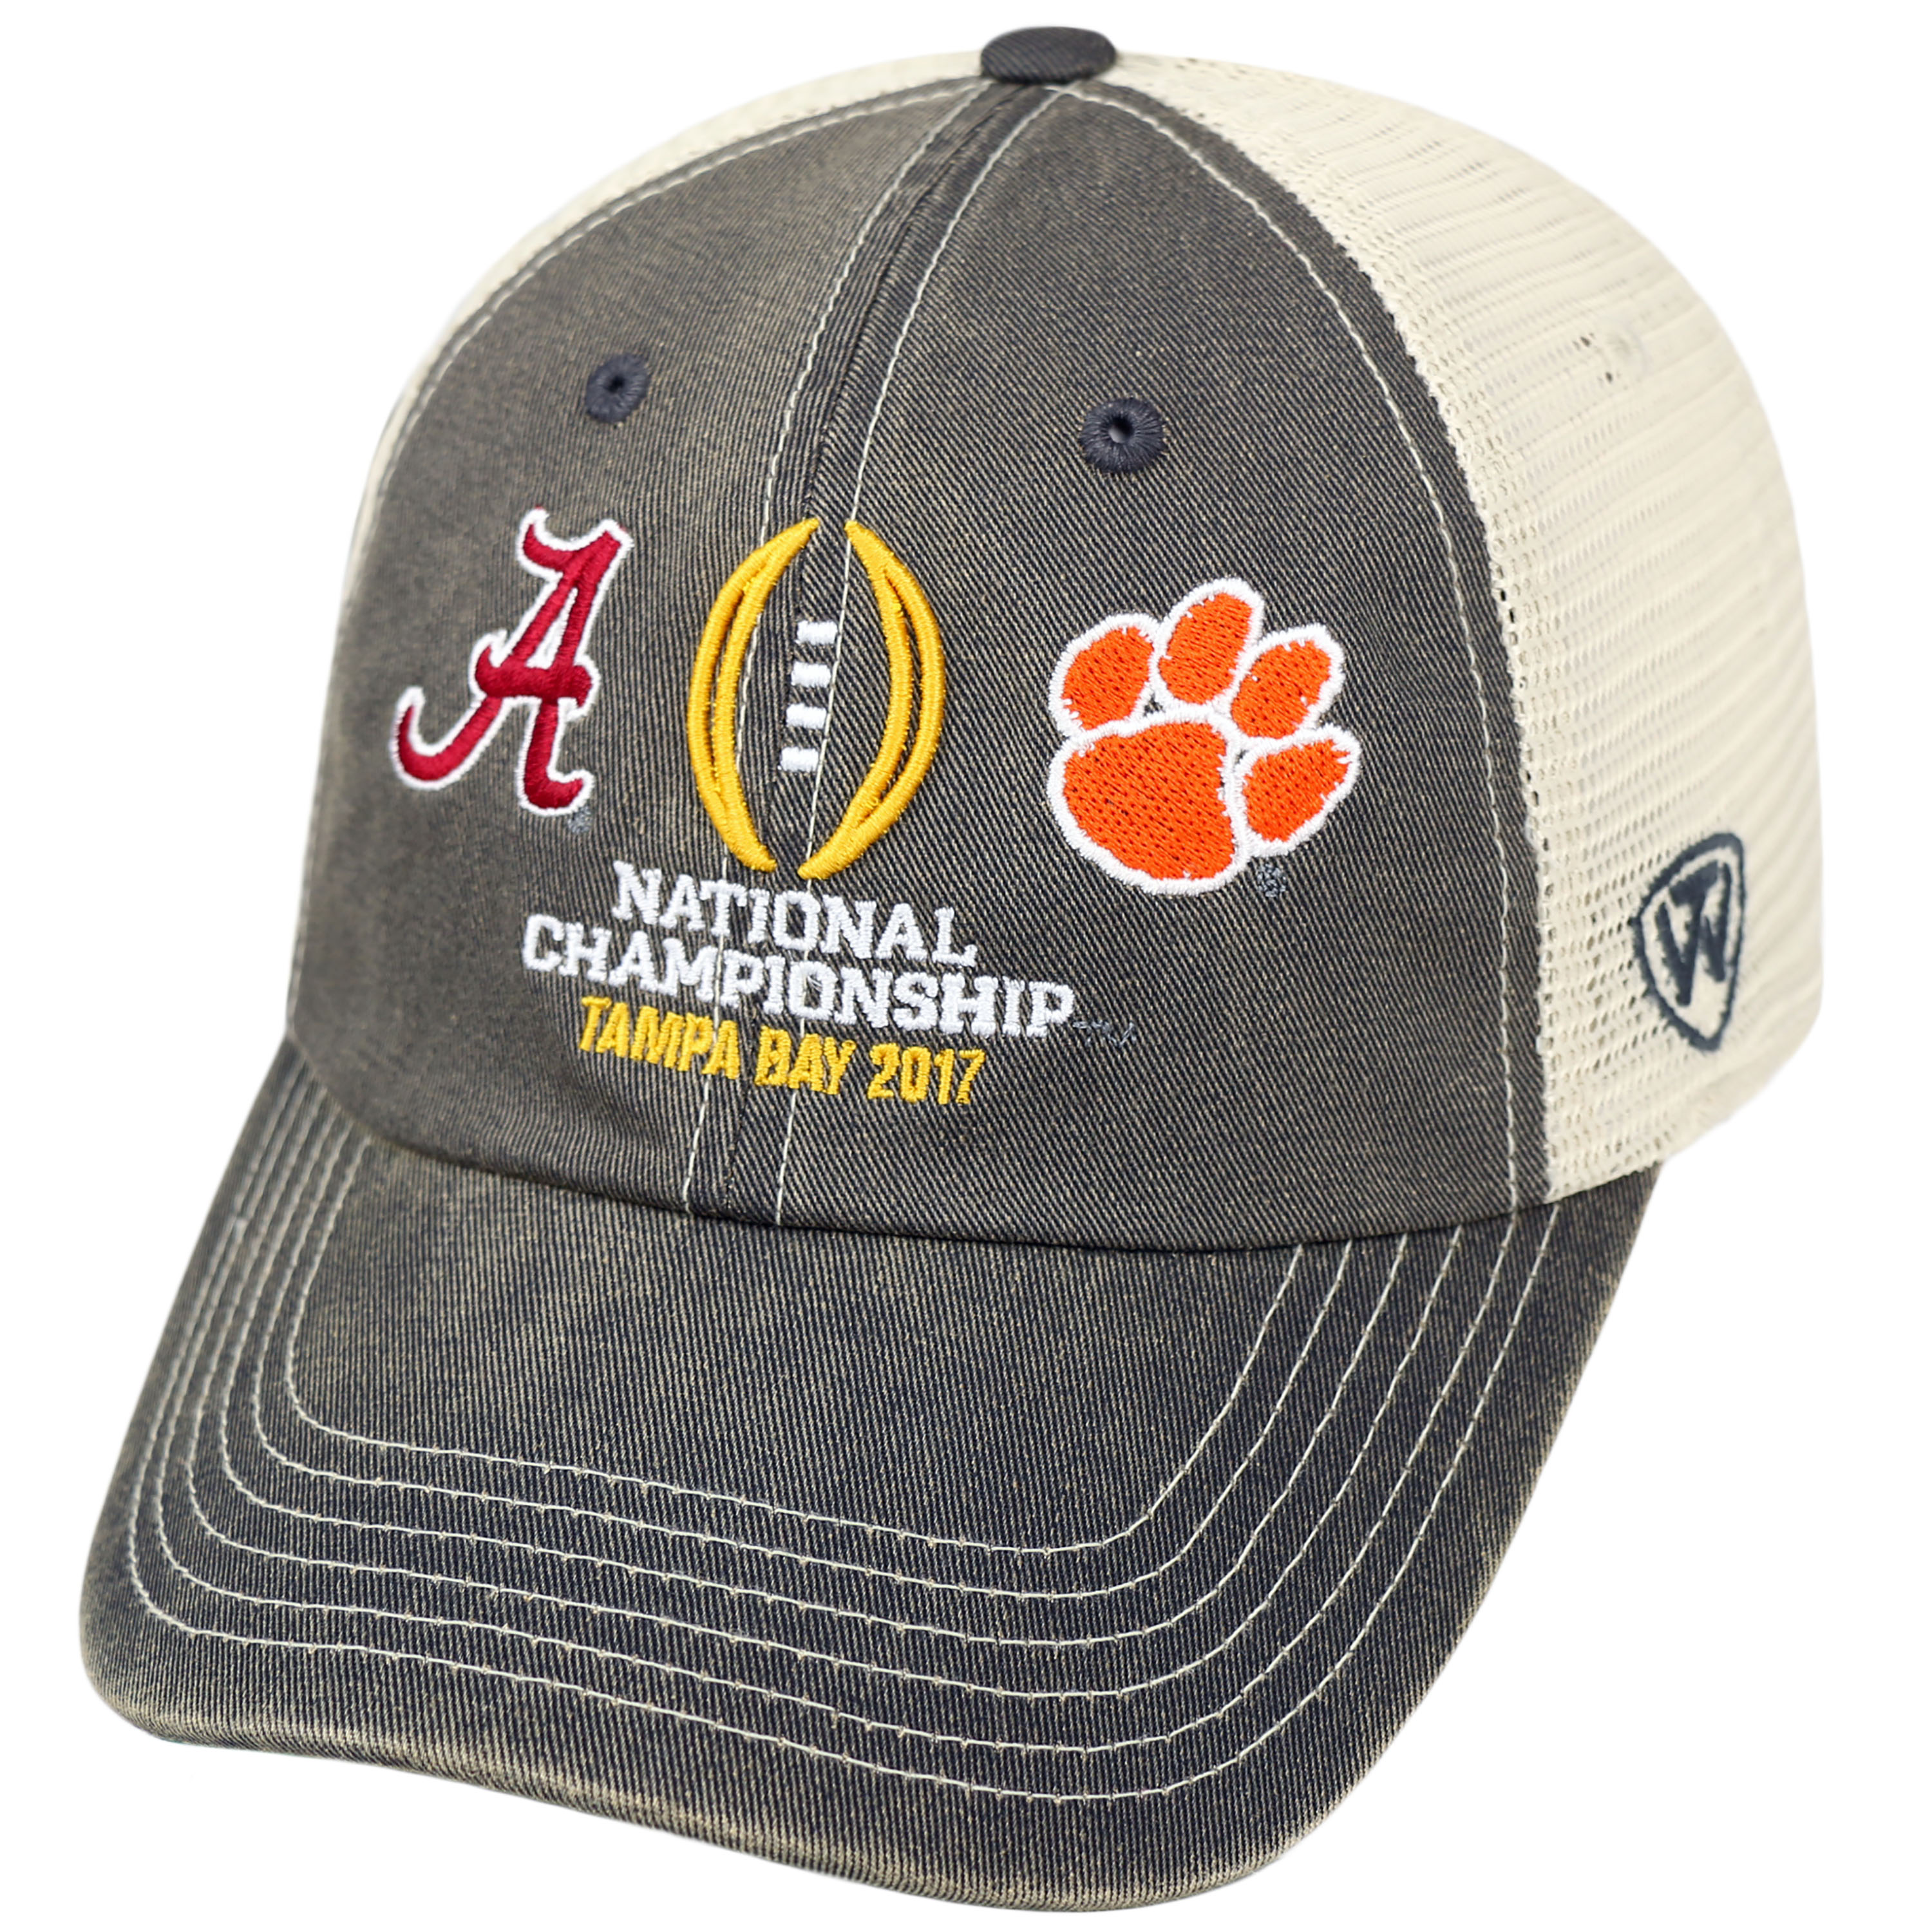 National Championship rivalry hat